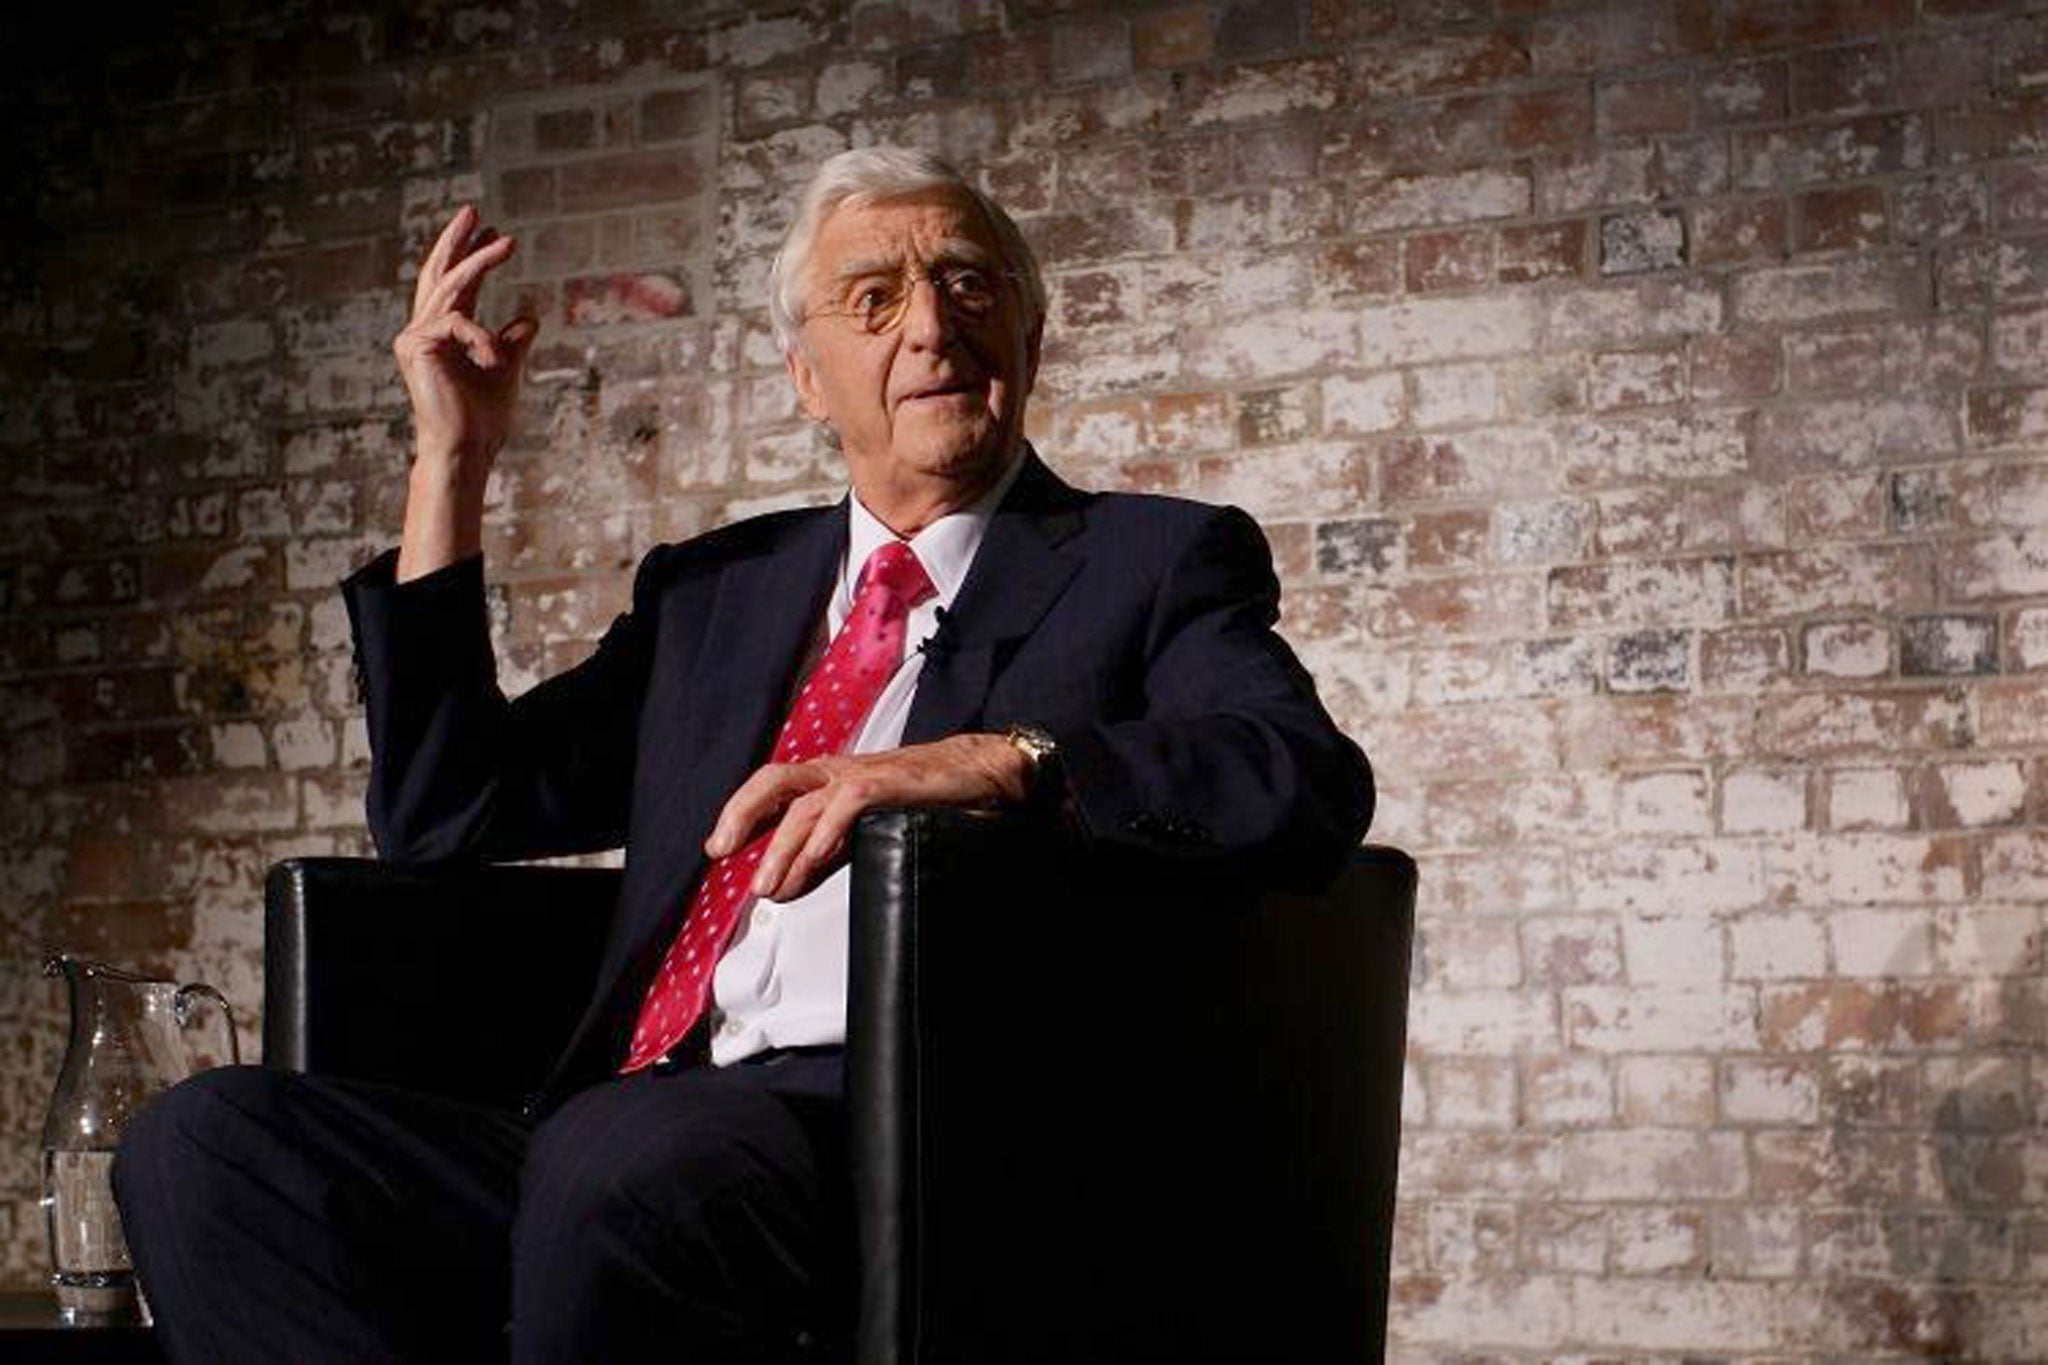 Sir Michael Parkinson, and other well-known people, should think twice before fronting ads for financial products